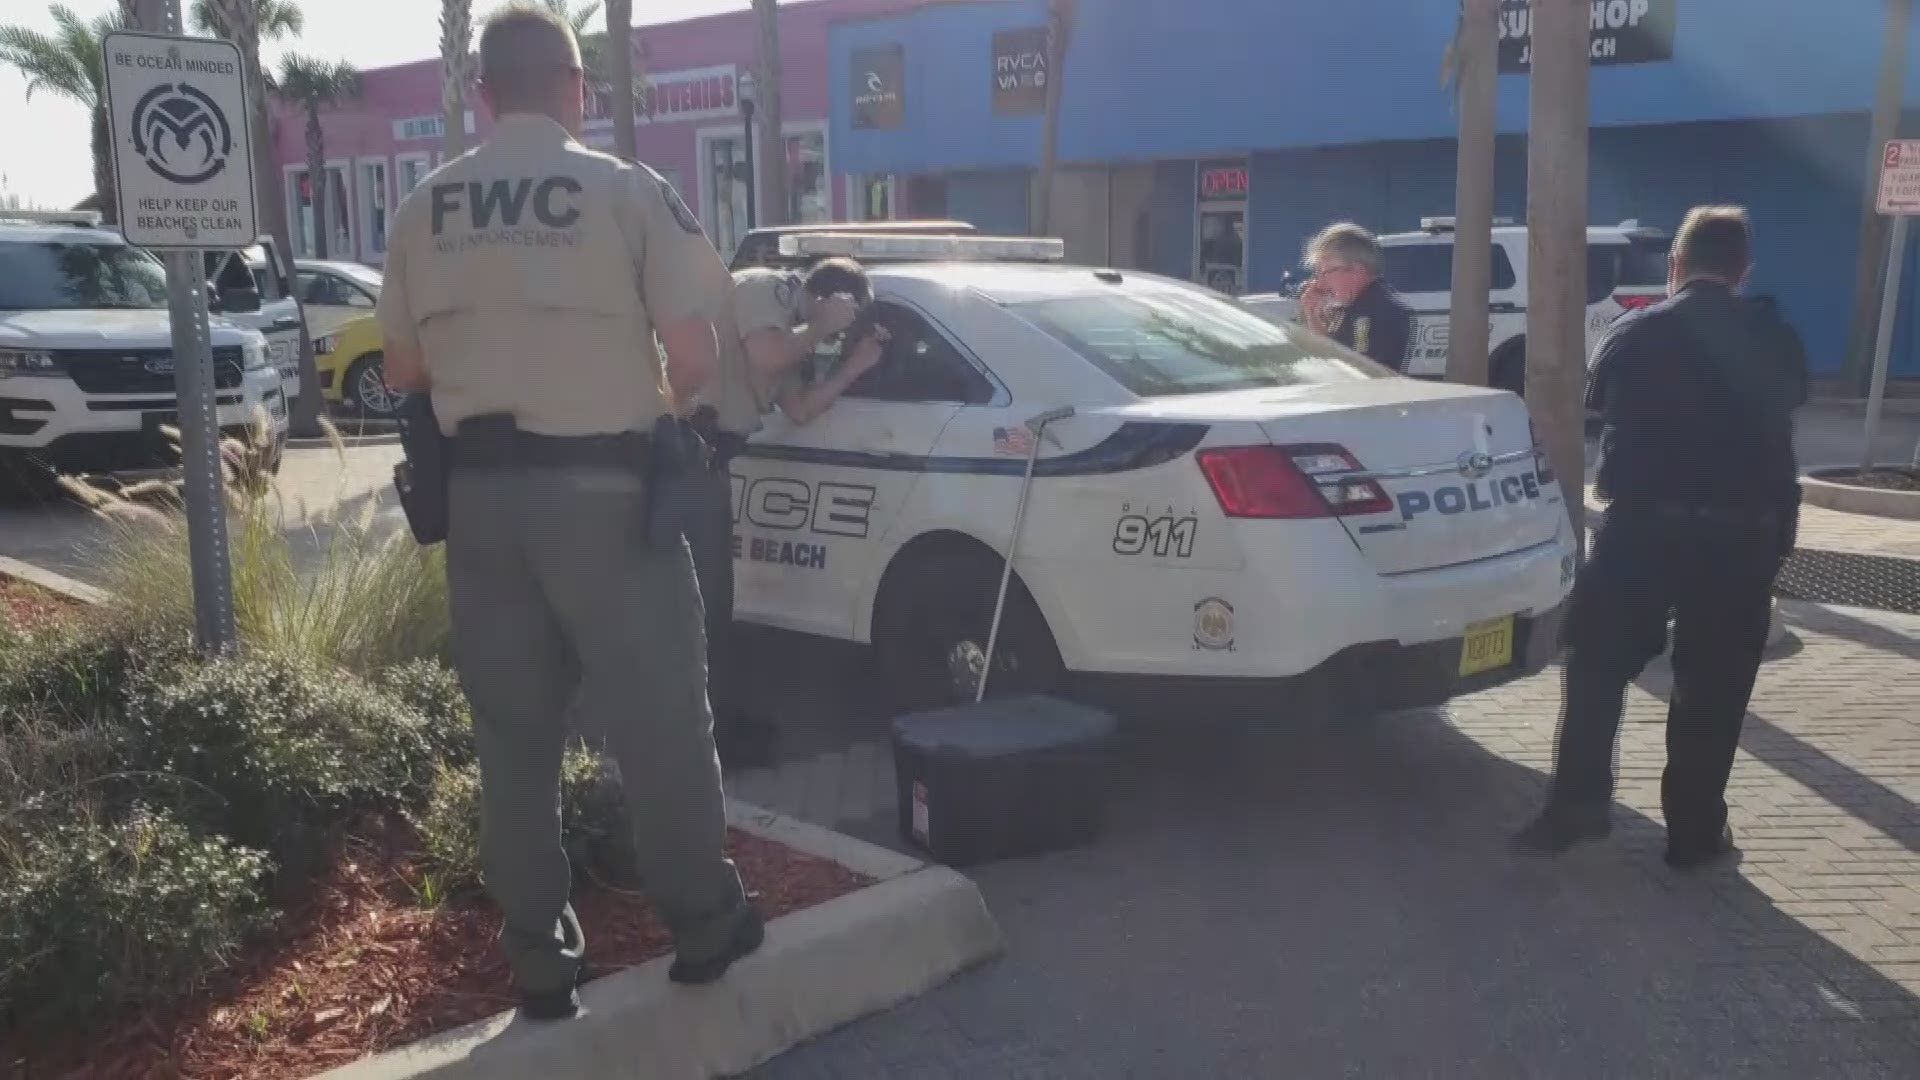 Police say a homeless man was found walking around with the nearly 8-foot long rattlesnake Monday morning. The FWC was able to capture it and will release it into the wild.